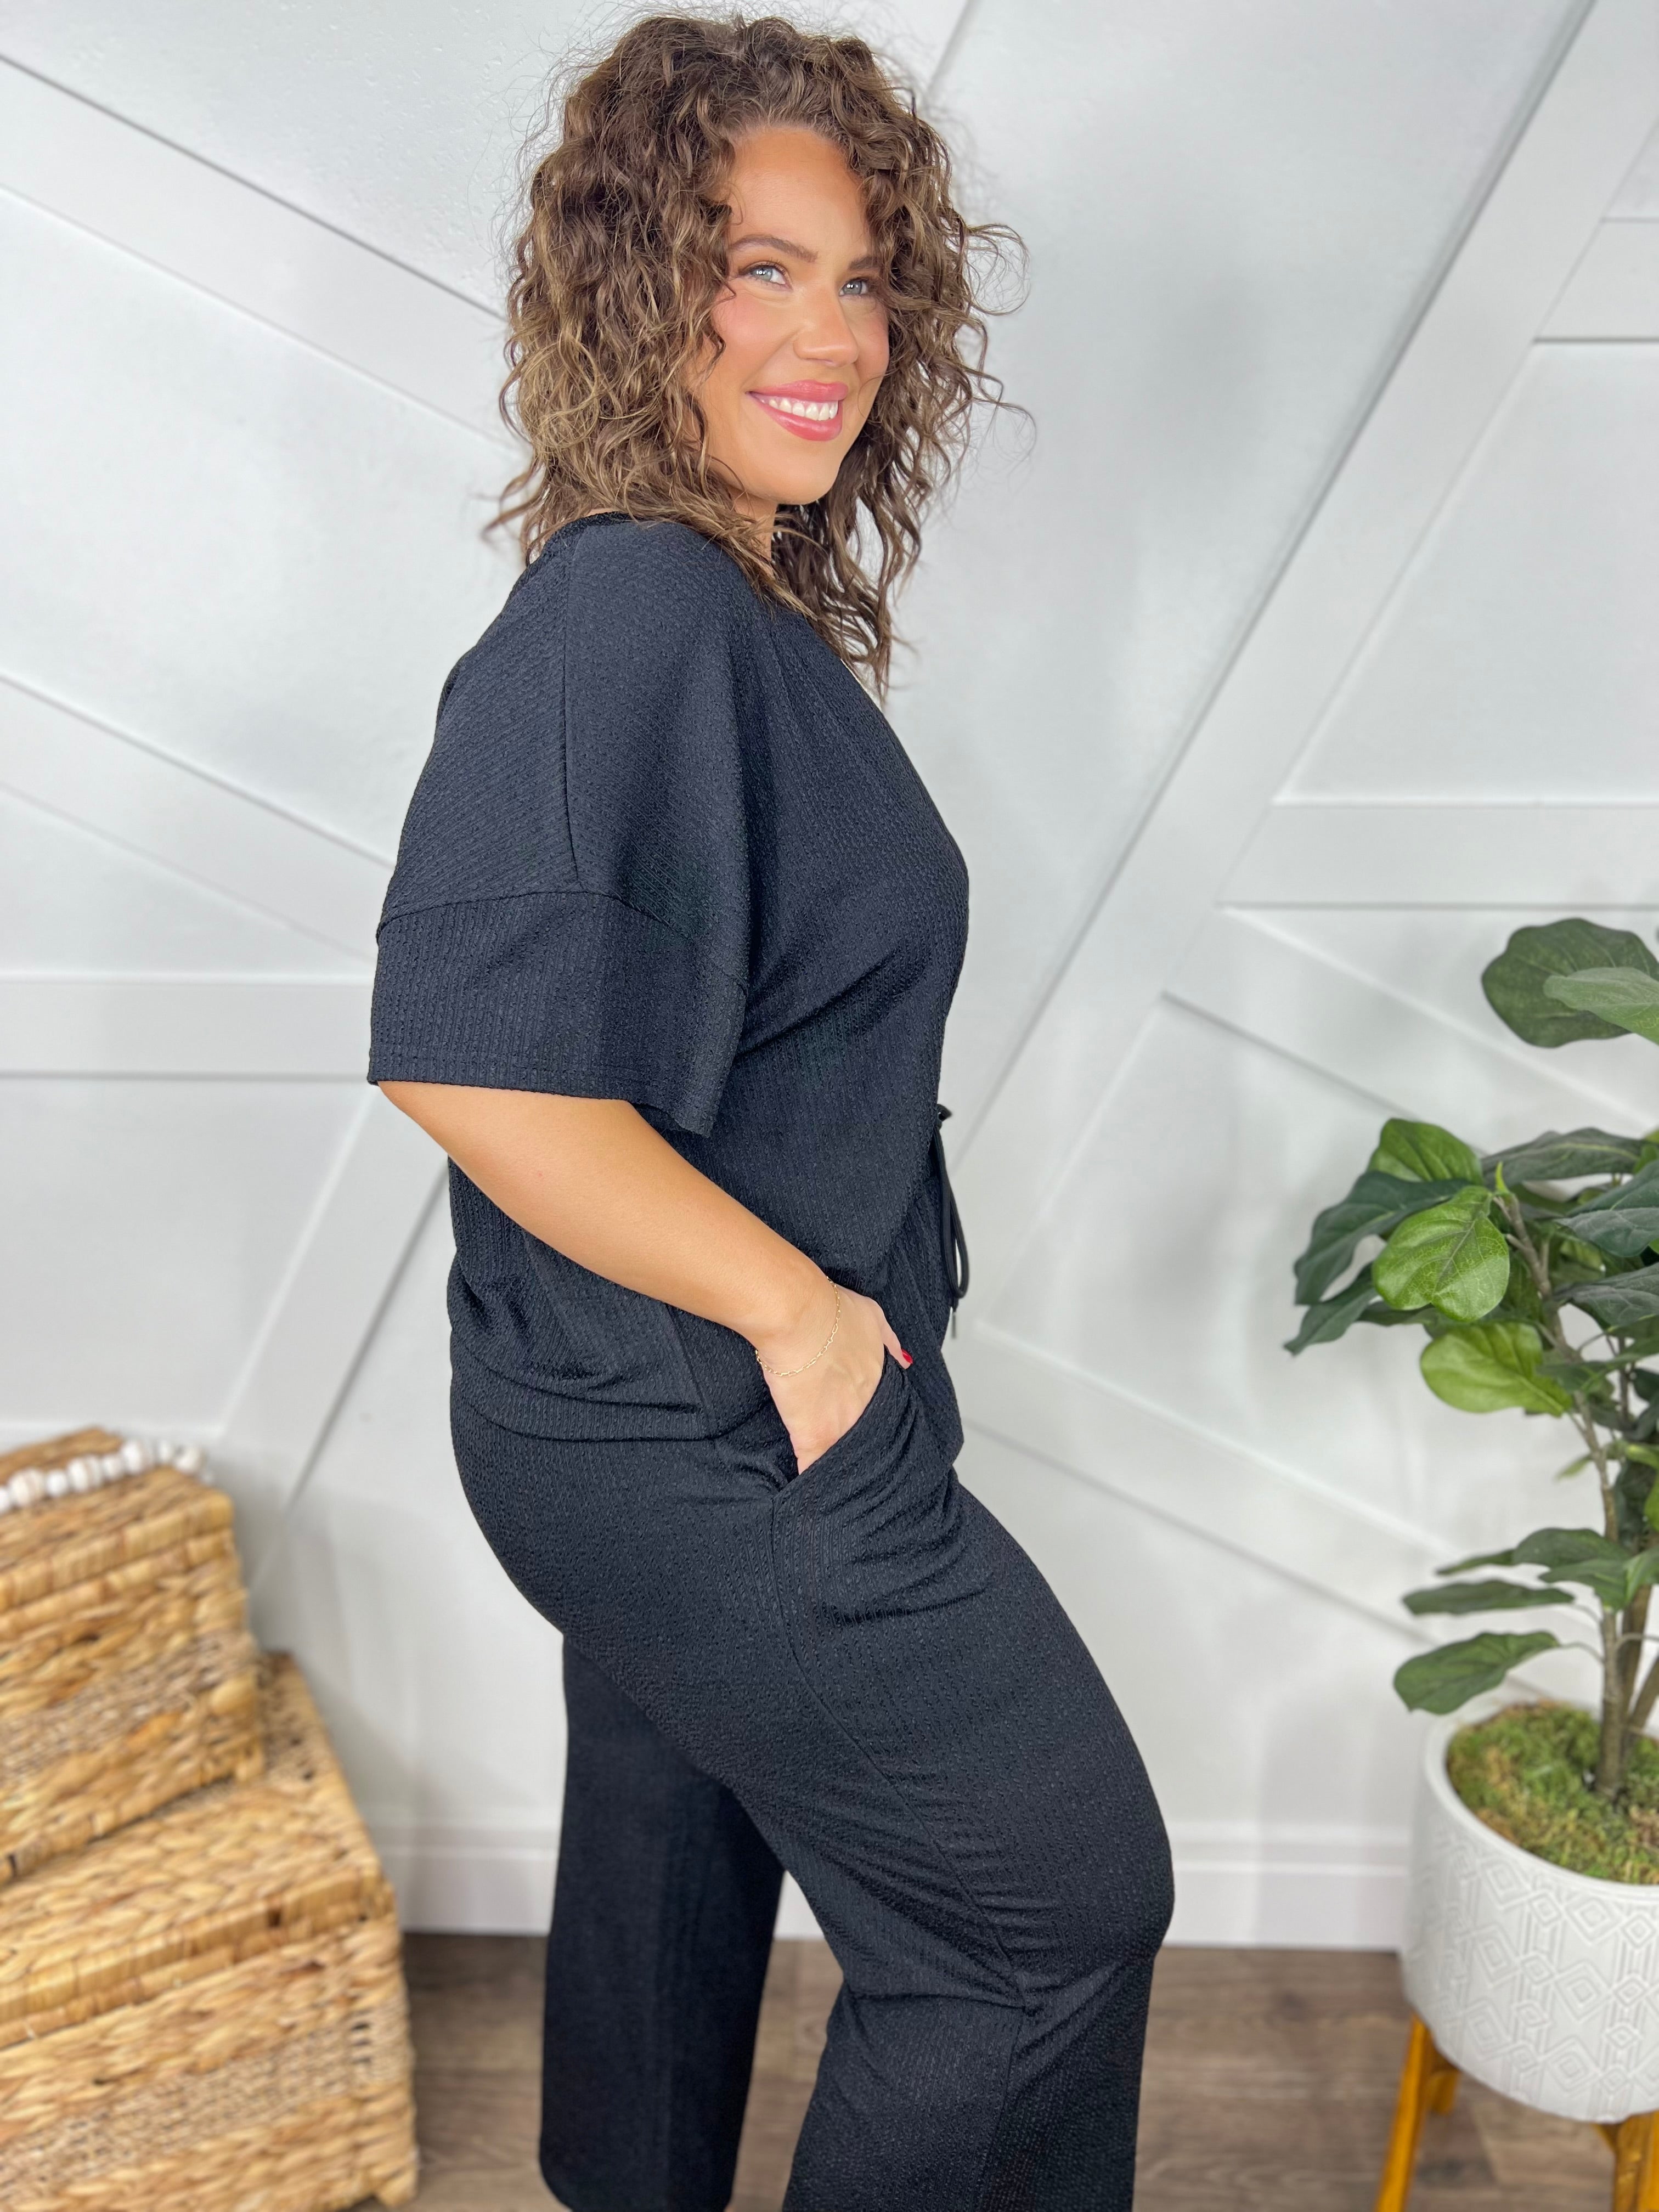 Double Take Full Size Texture Round Neck Short Sleeve T-Shirt and Wide Leg Pants-Sets-Trendsi-Heathered Boho Boutique, Women's Fashion and Accessories in Palmetto, FL